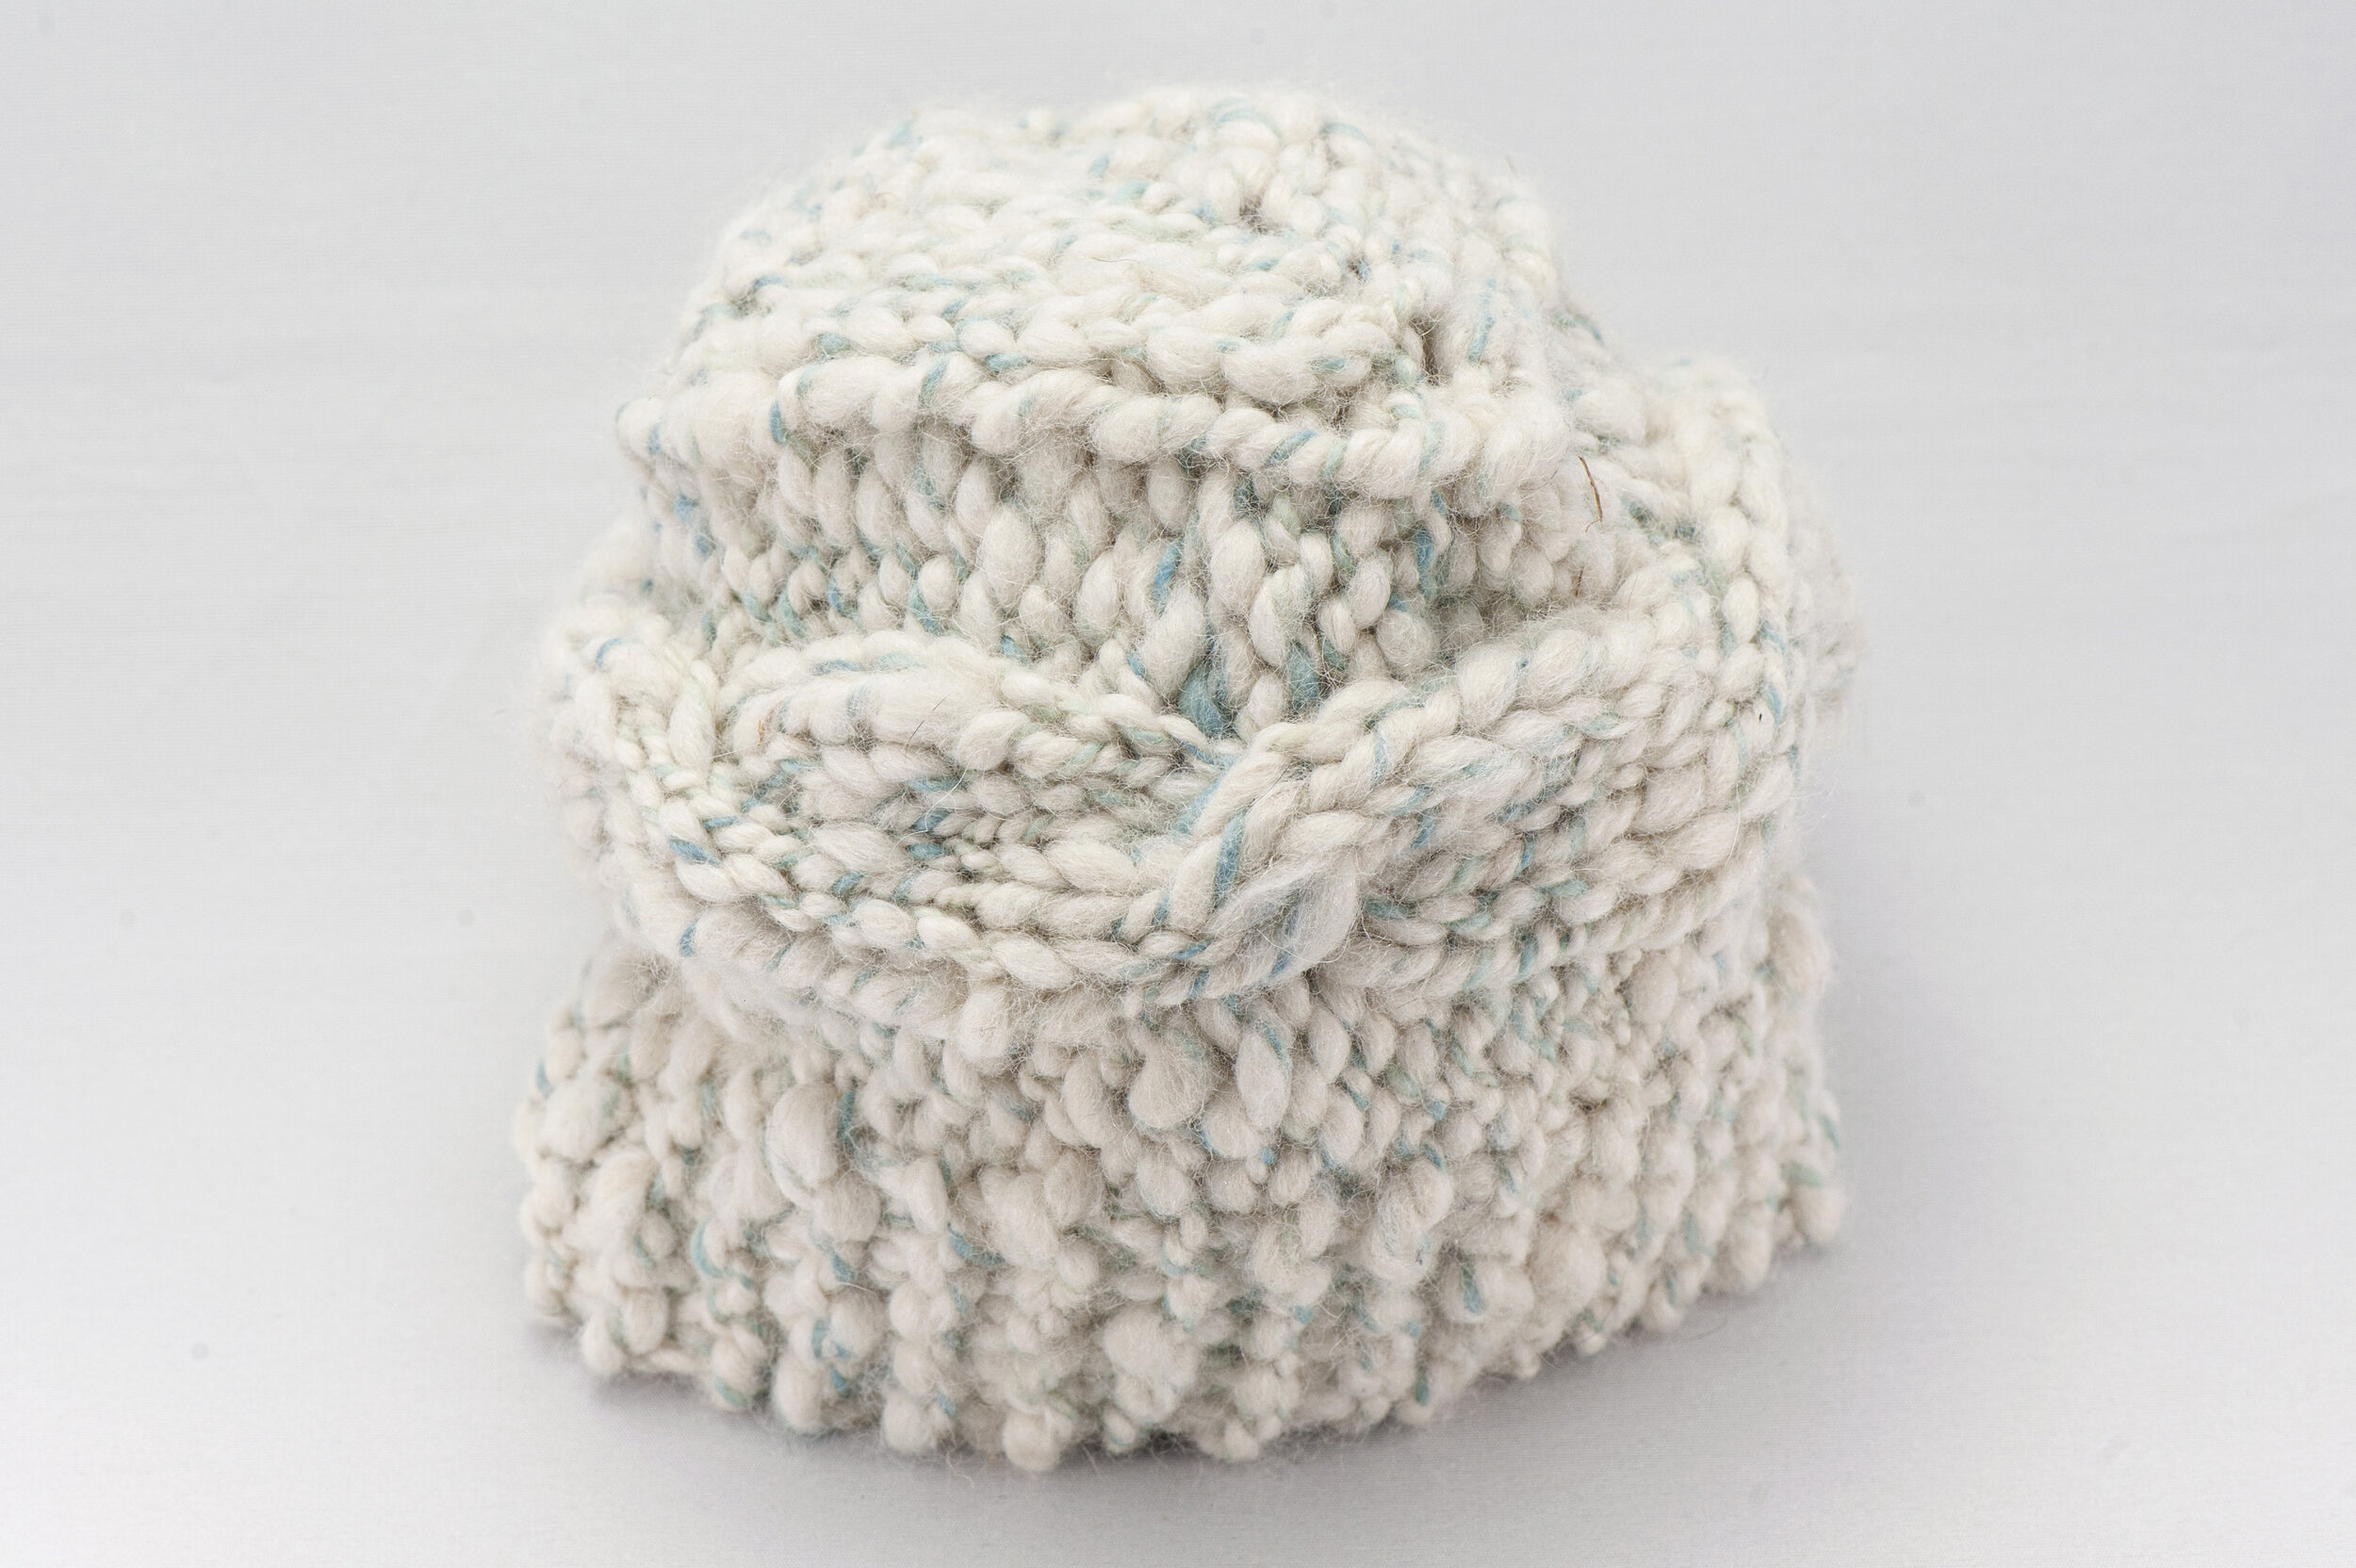 Knitted hat from hand-spun yarn